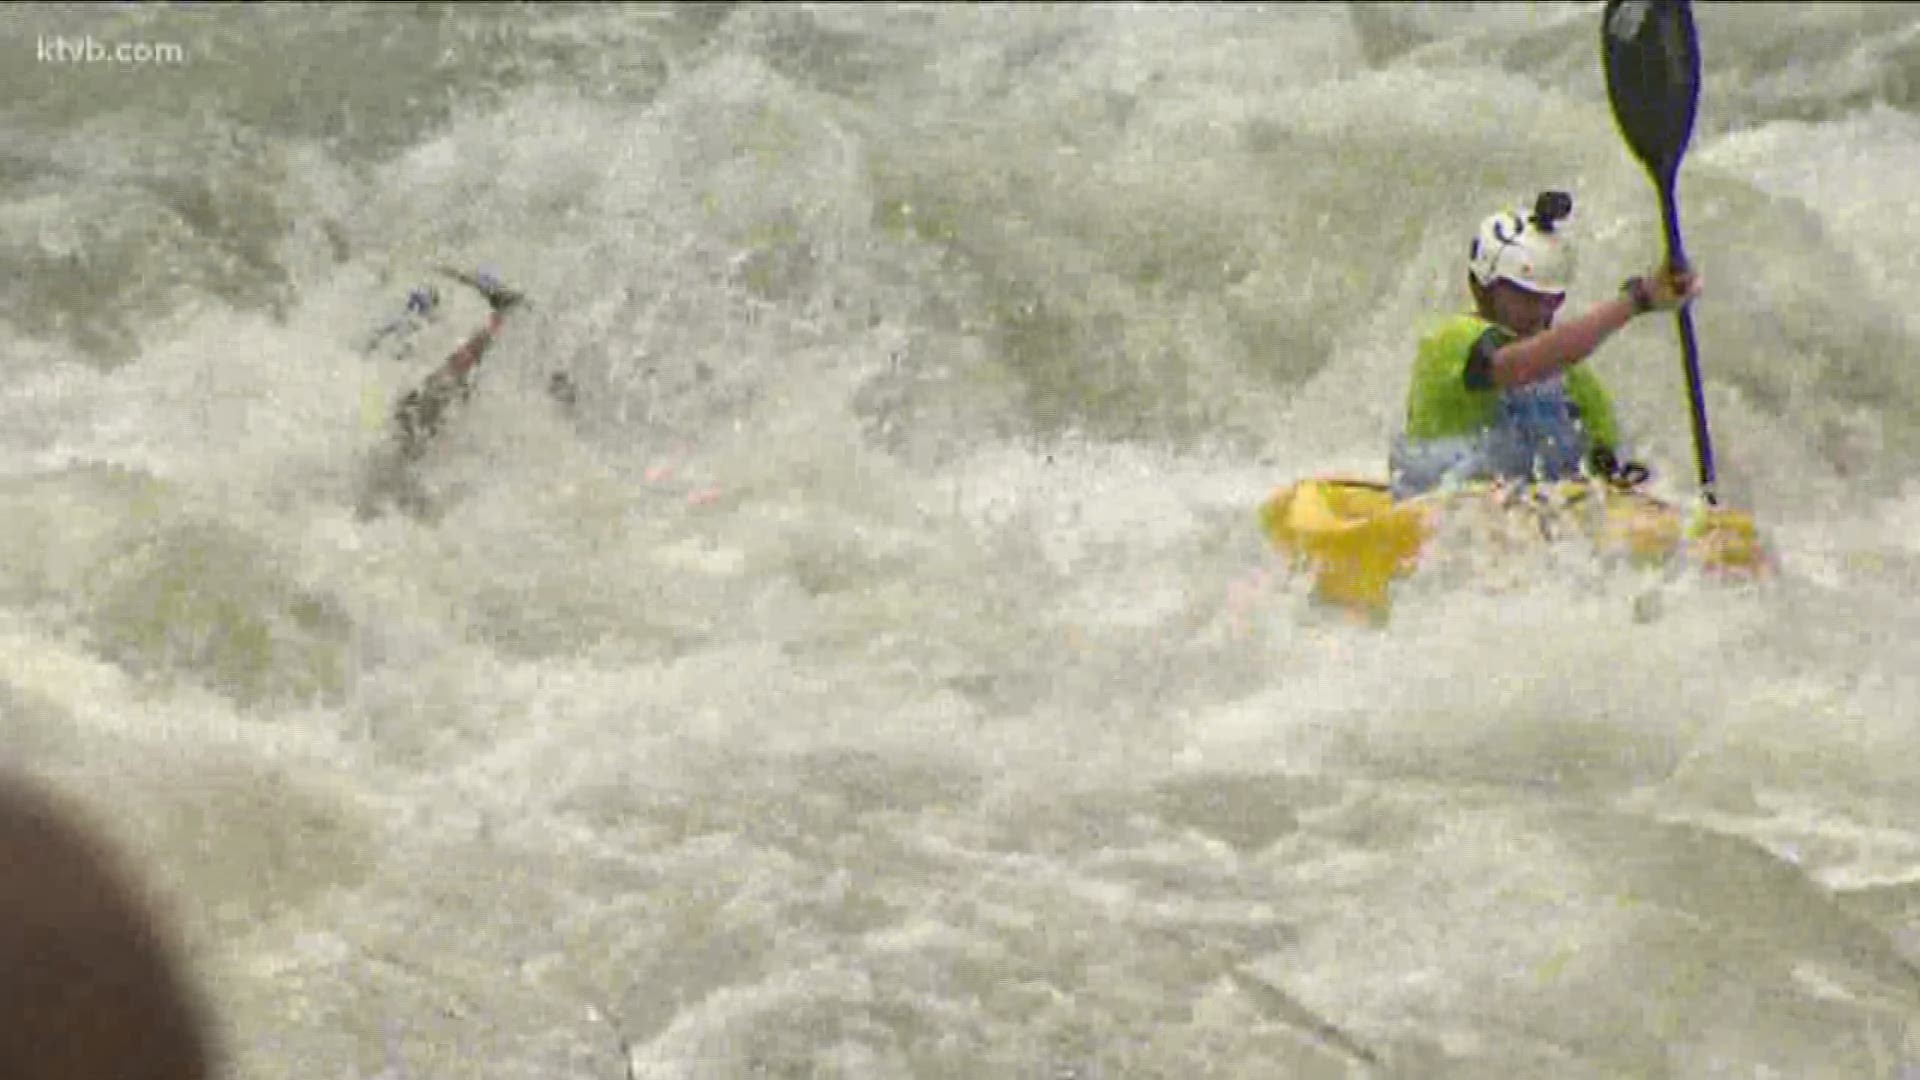 The competition is taking place on the North Fork of the Payette River.